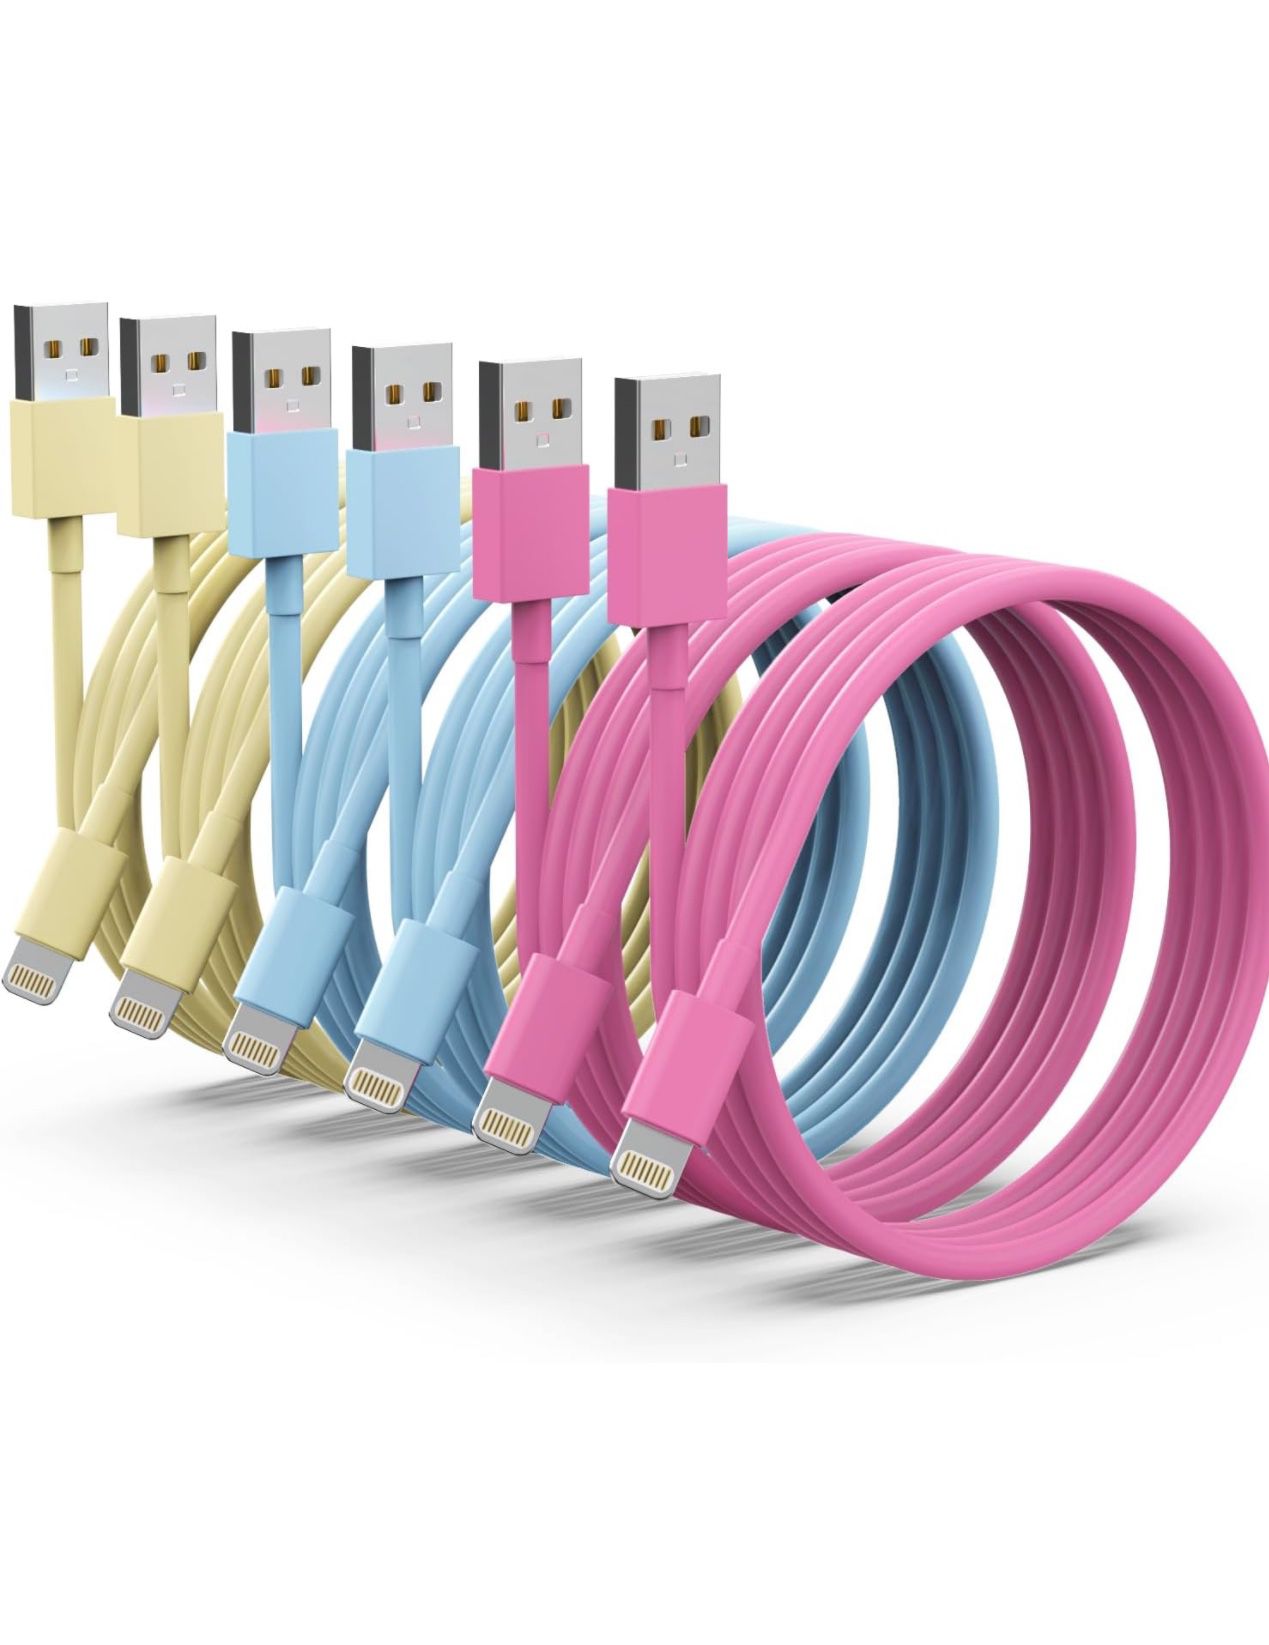 Brandnew [Apple MFi Certified] iPhone Charger 6Pack(3/3/6/6/6/10 FT) Lightning Cable iPhone Charger Fast Charging Compatible with iPhone 14/13/12/11/P